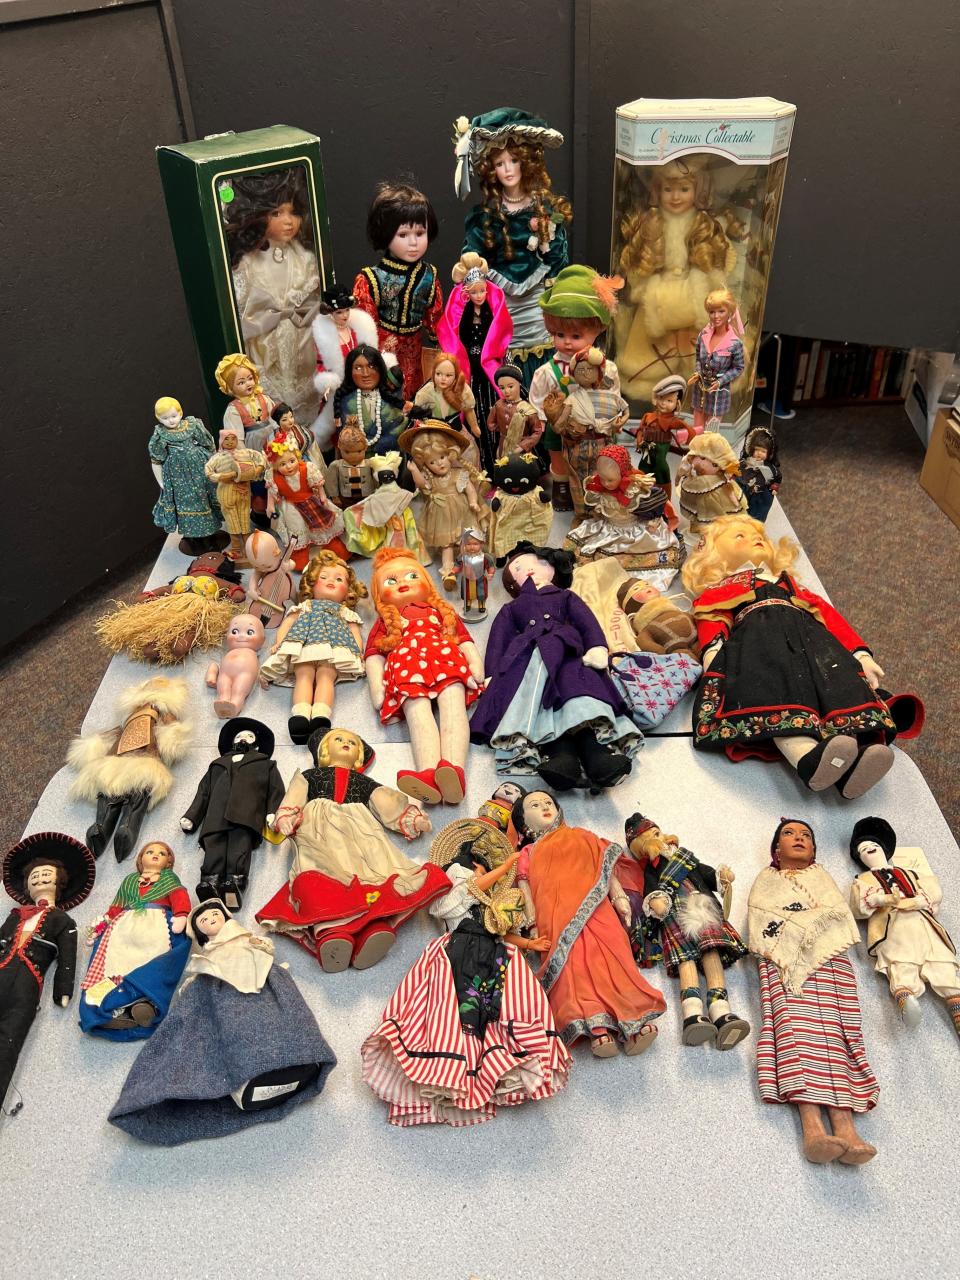 Dolls collected from world travel, as well as Barbie dolls, are among more than 300 that will be auctioned by the Center for Active Adults in South Lyon.